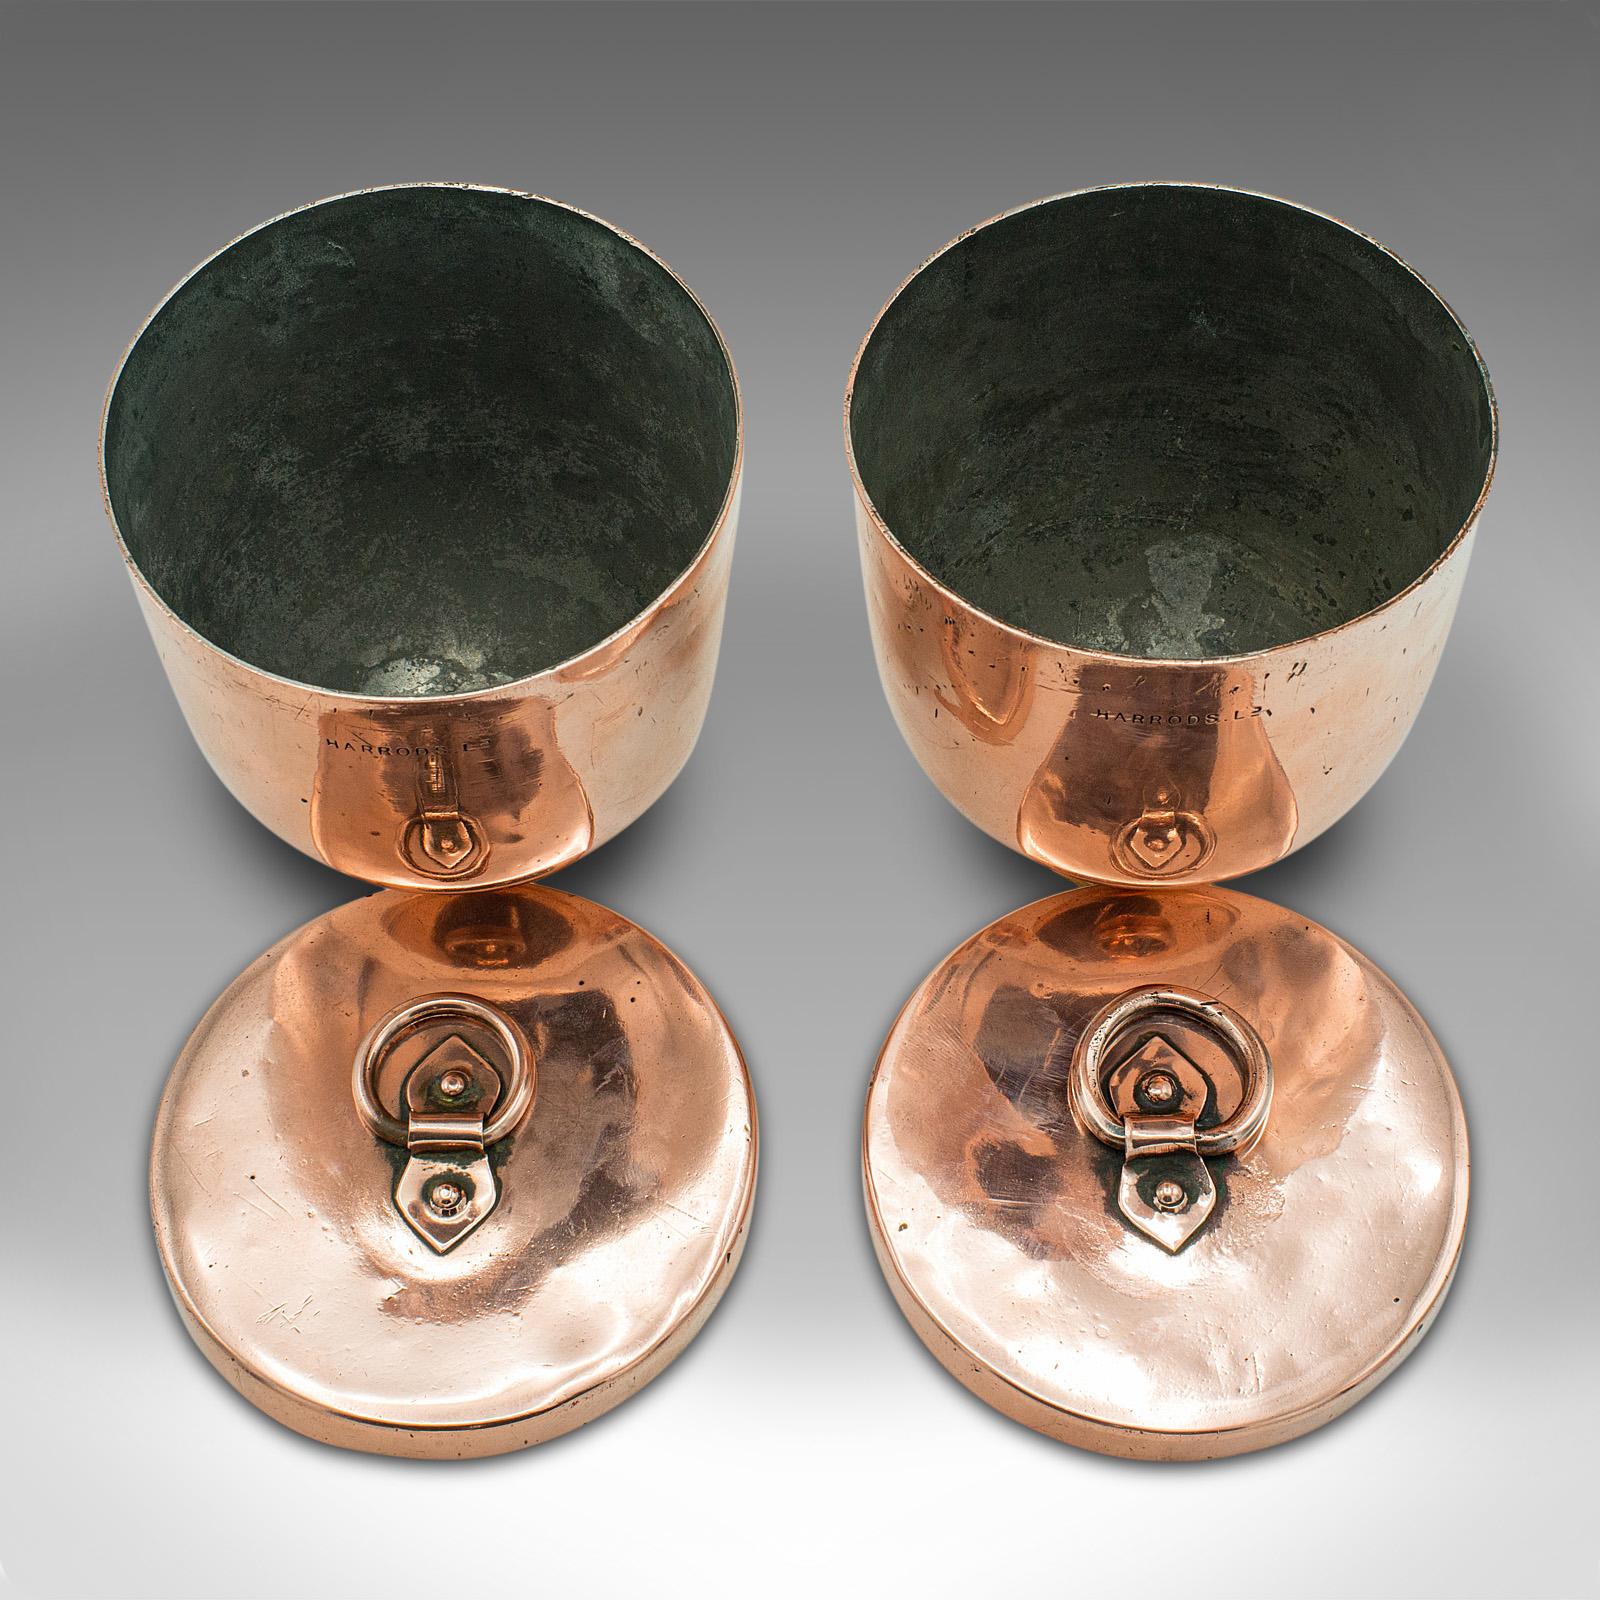 Pair of Antique Tobacco Keepers, English Copper, Brass, Jars, Harrods, Victorian For Sale 3